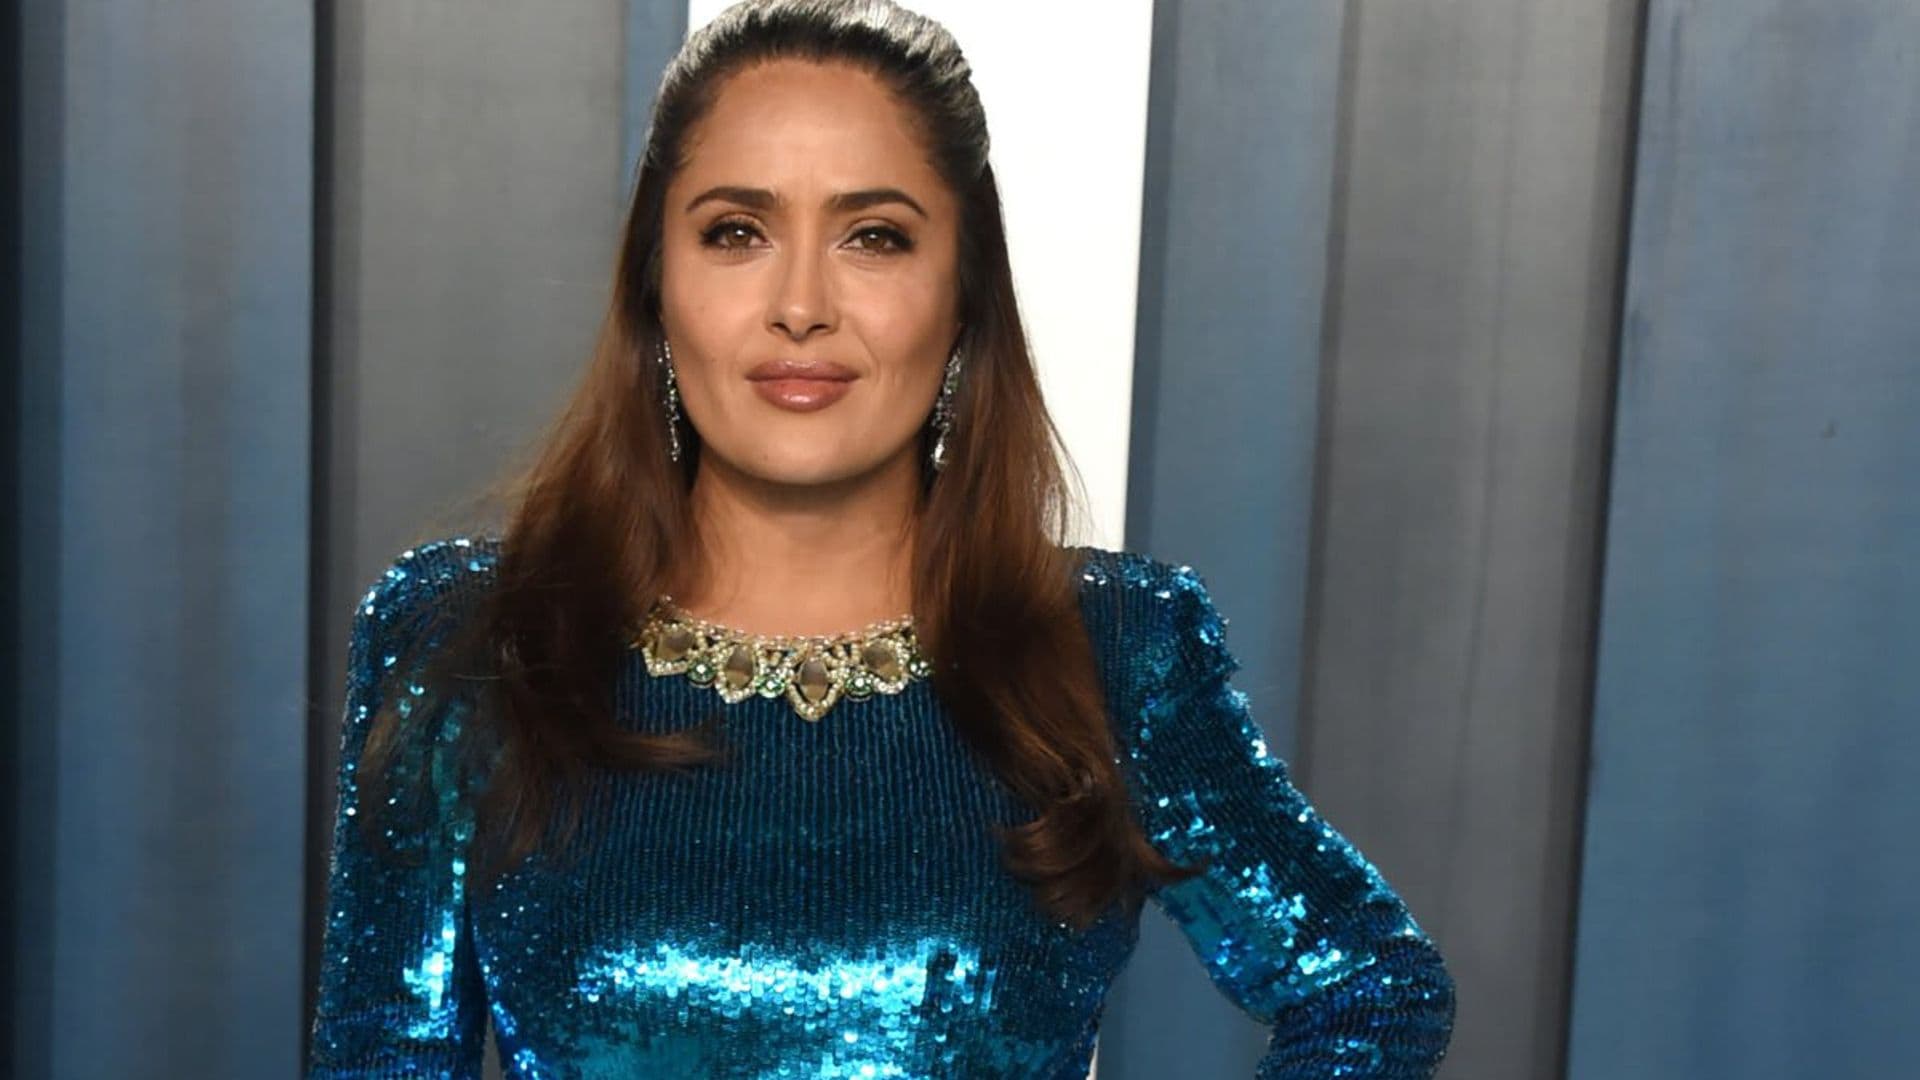 This is the reason why Salma Hayek spent the Oscars’ night at the hospital